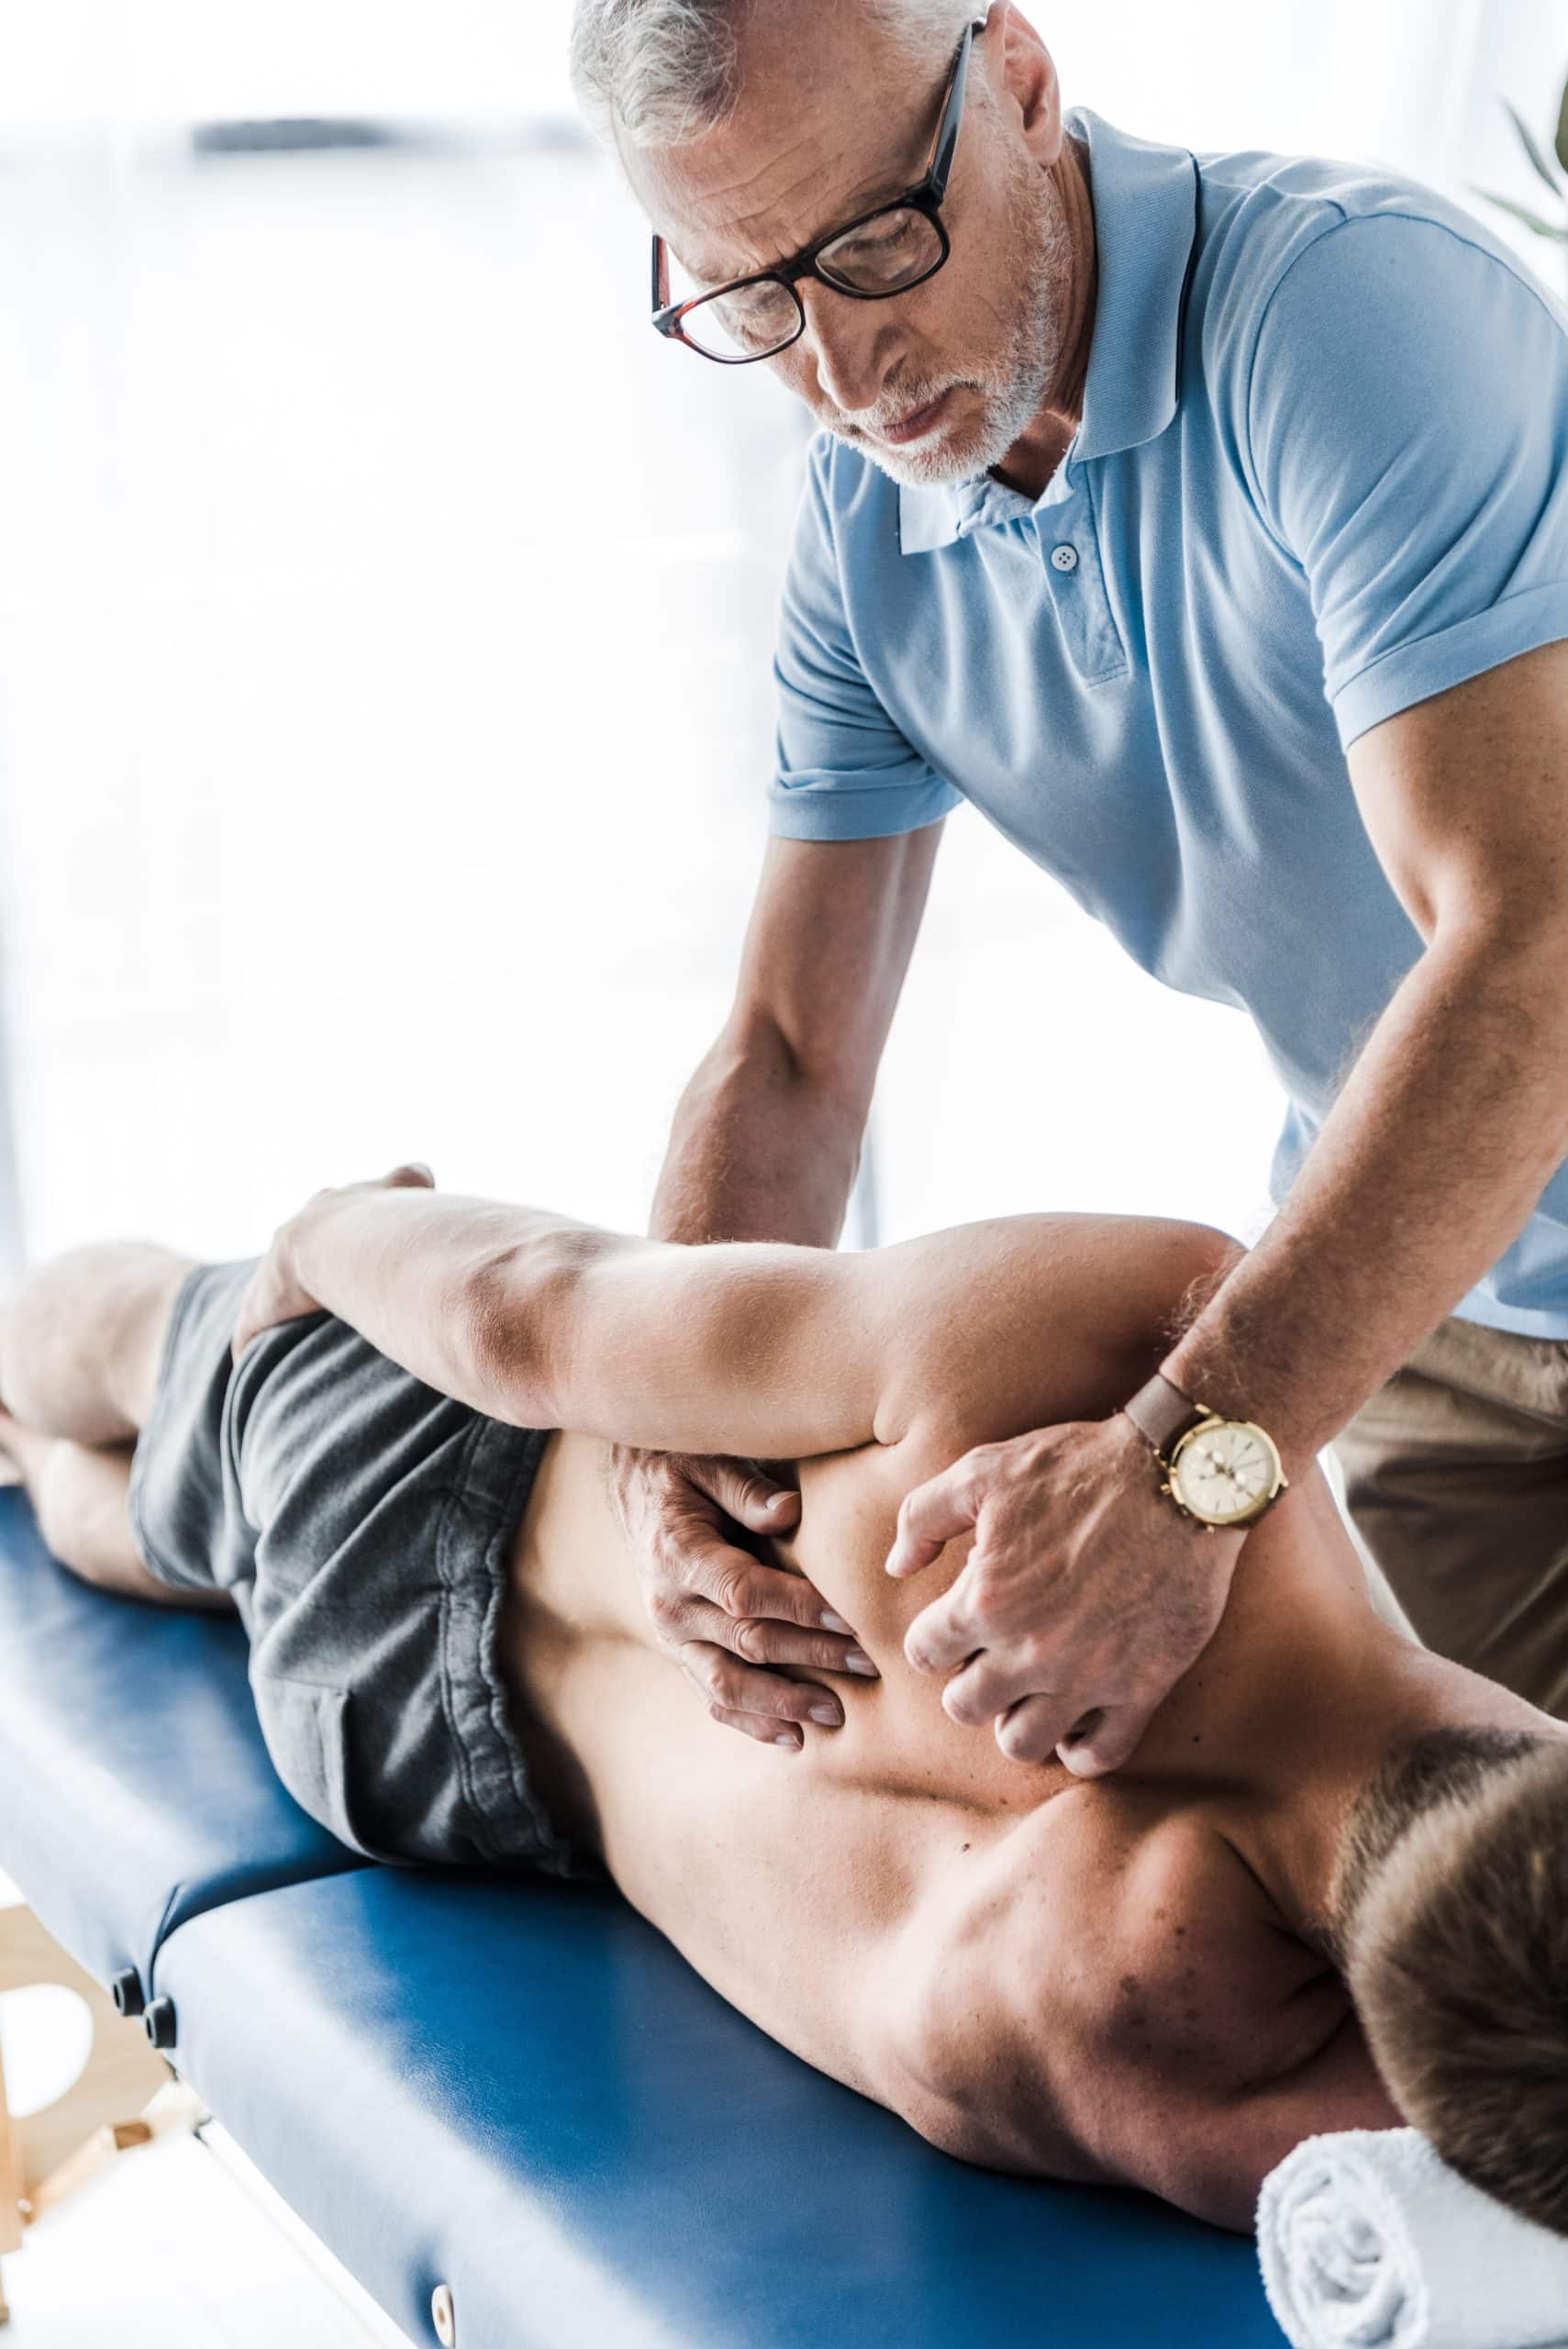 Chiropractor performing a spinal adjustment on a patient.